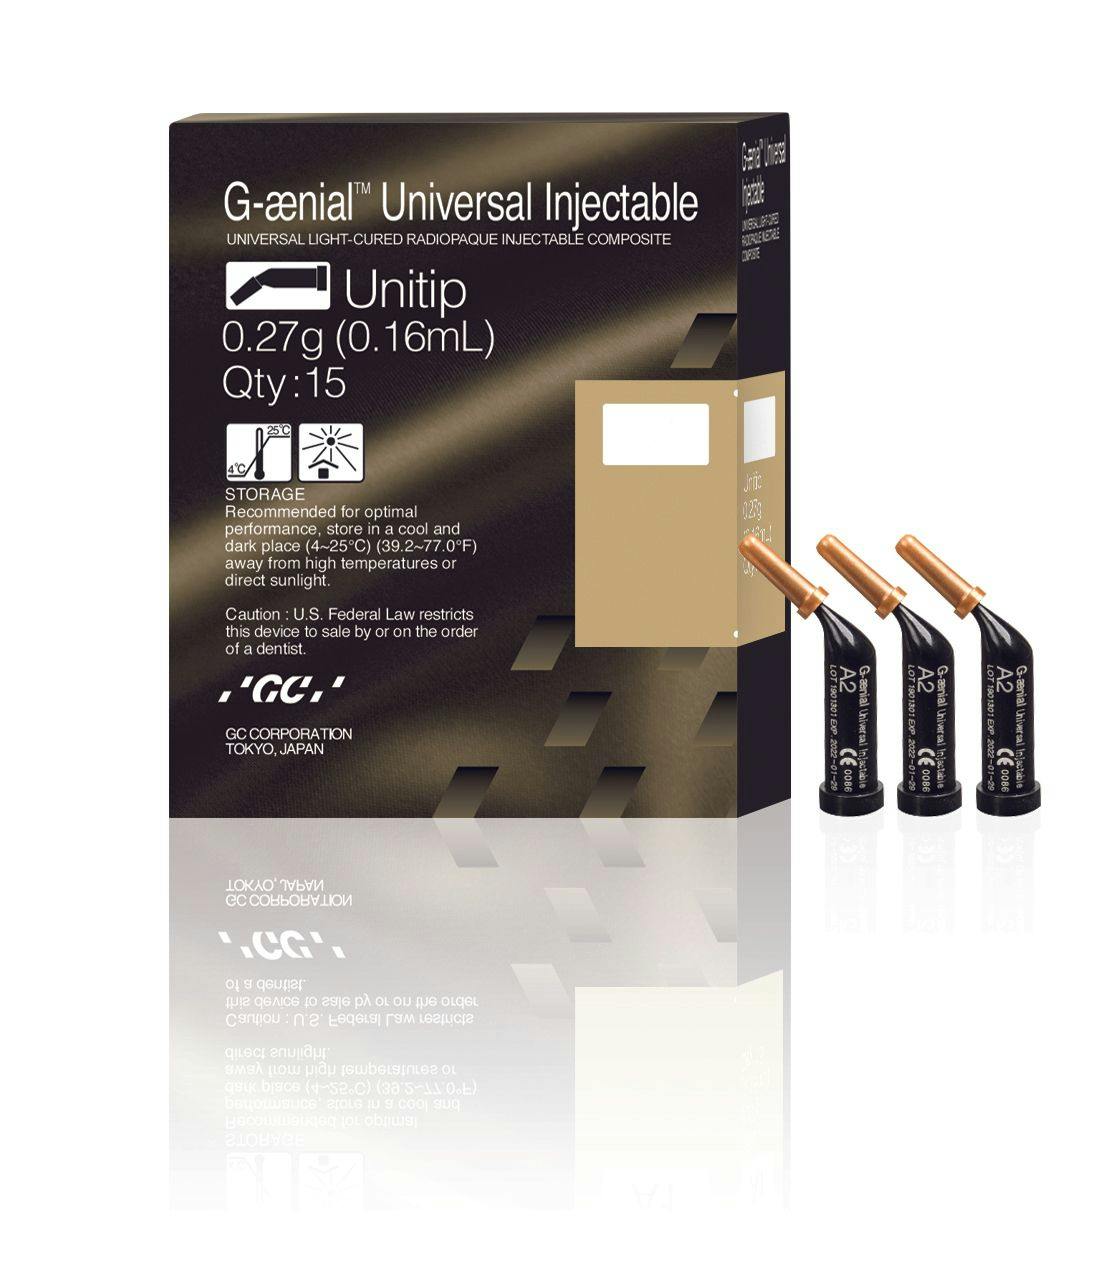 G-ænial™ Universal Injectable Unitips